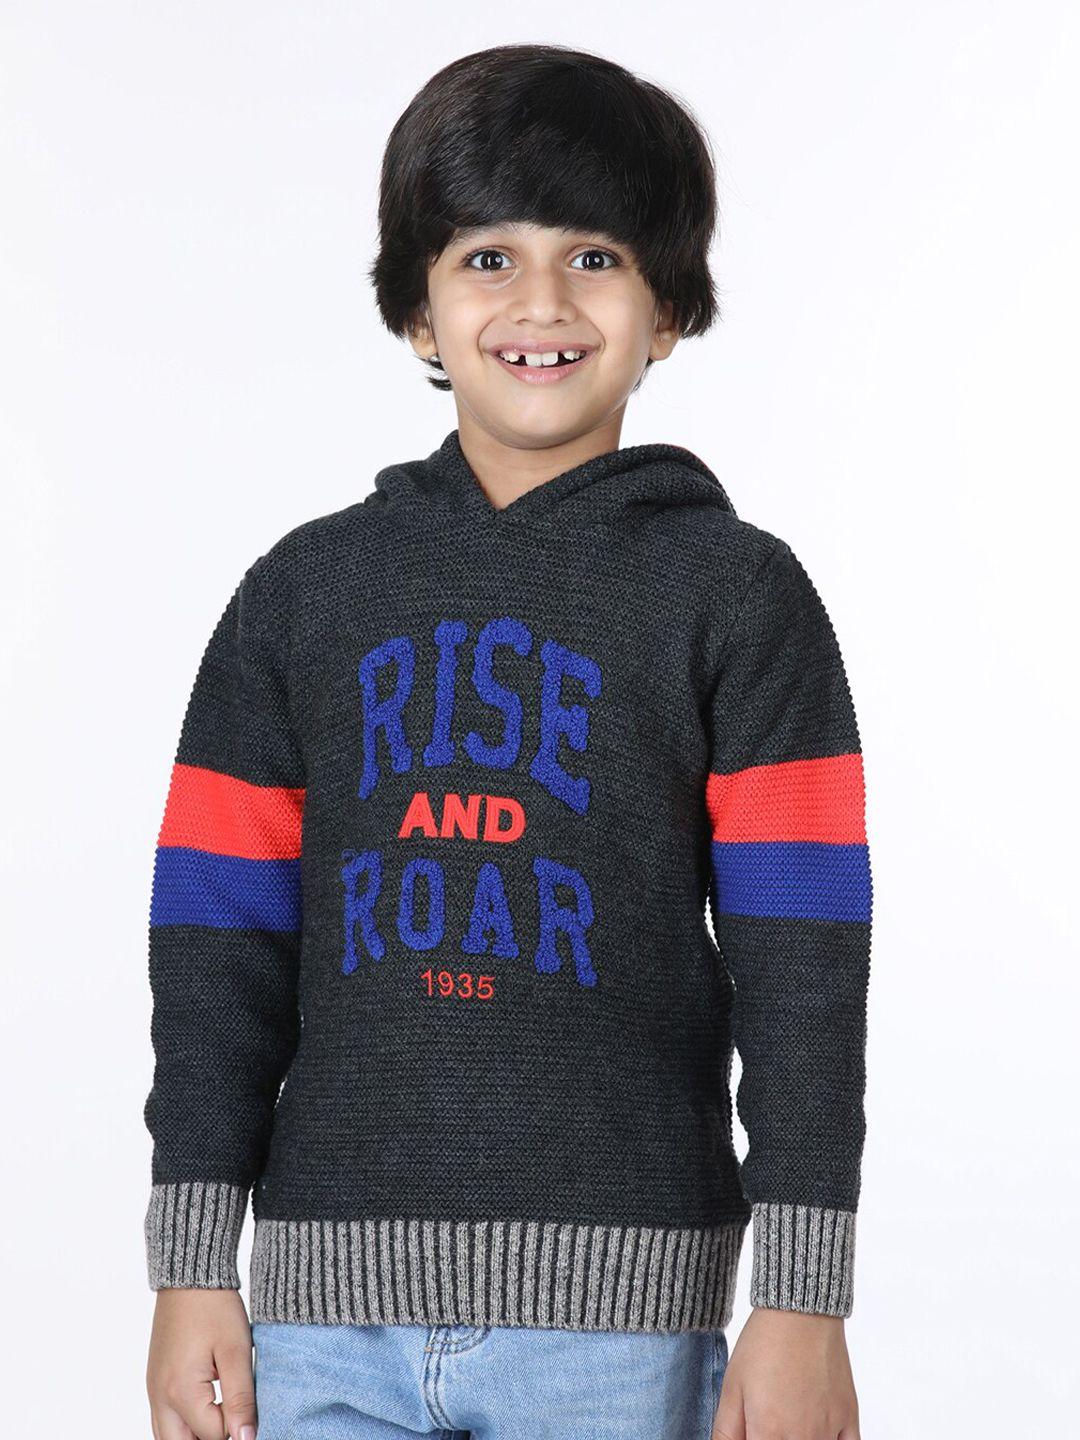 wingsfield-boys-self-design-hooded-pullover-sweater